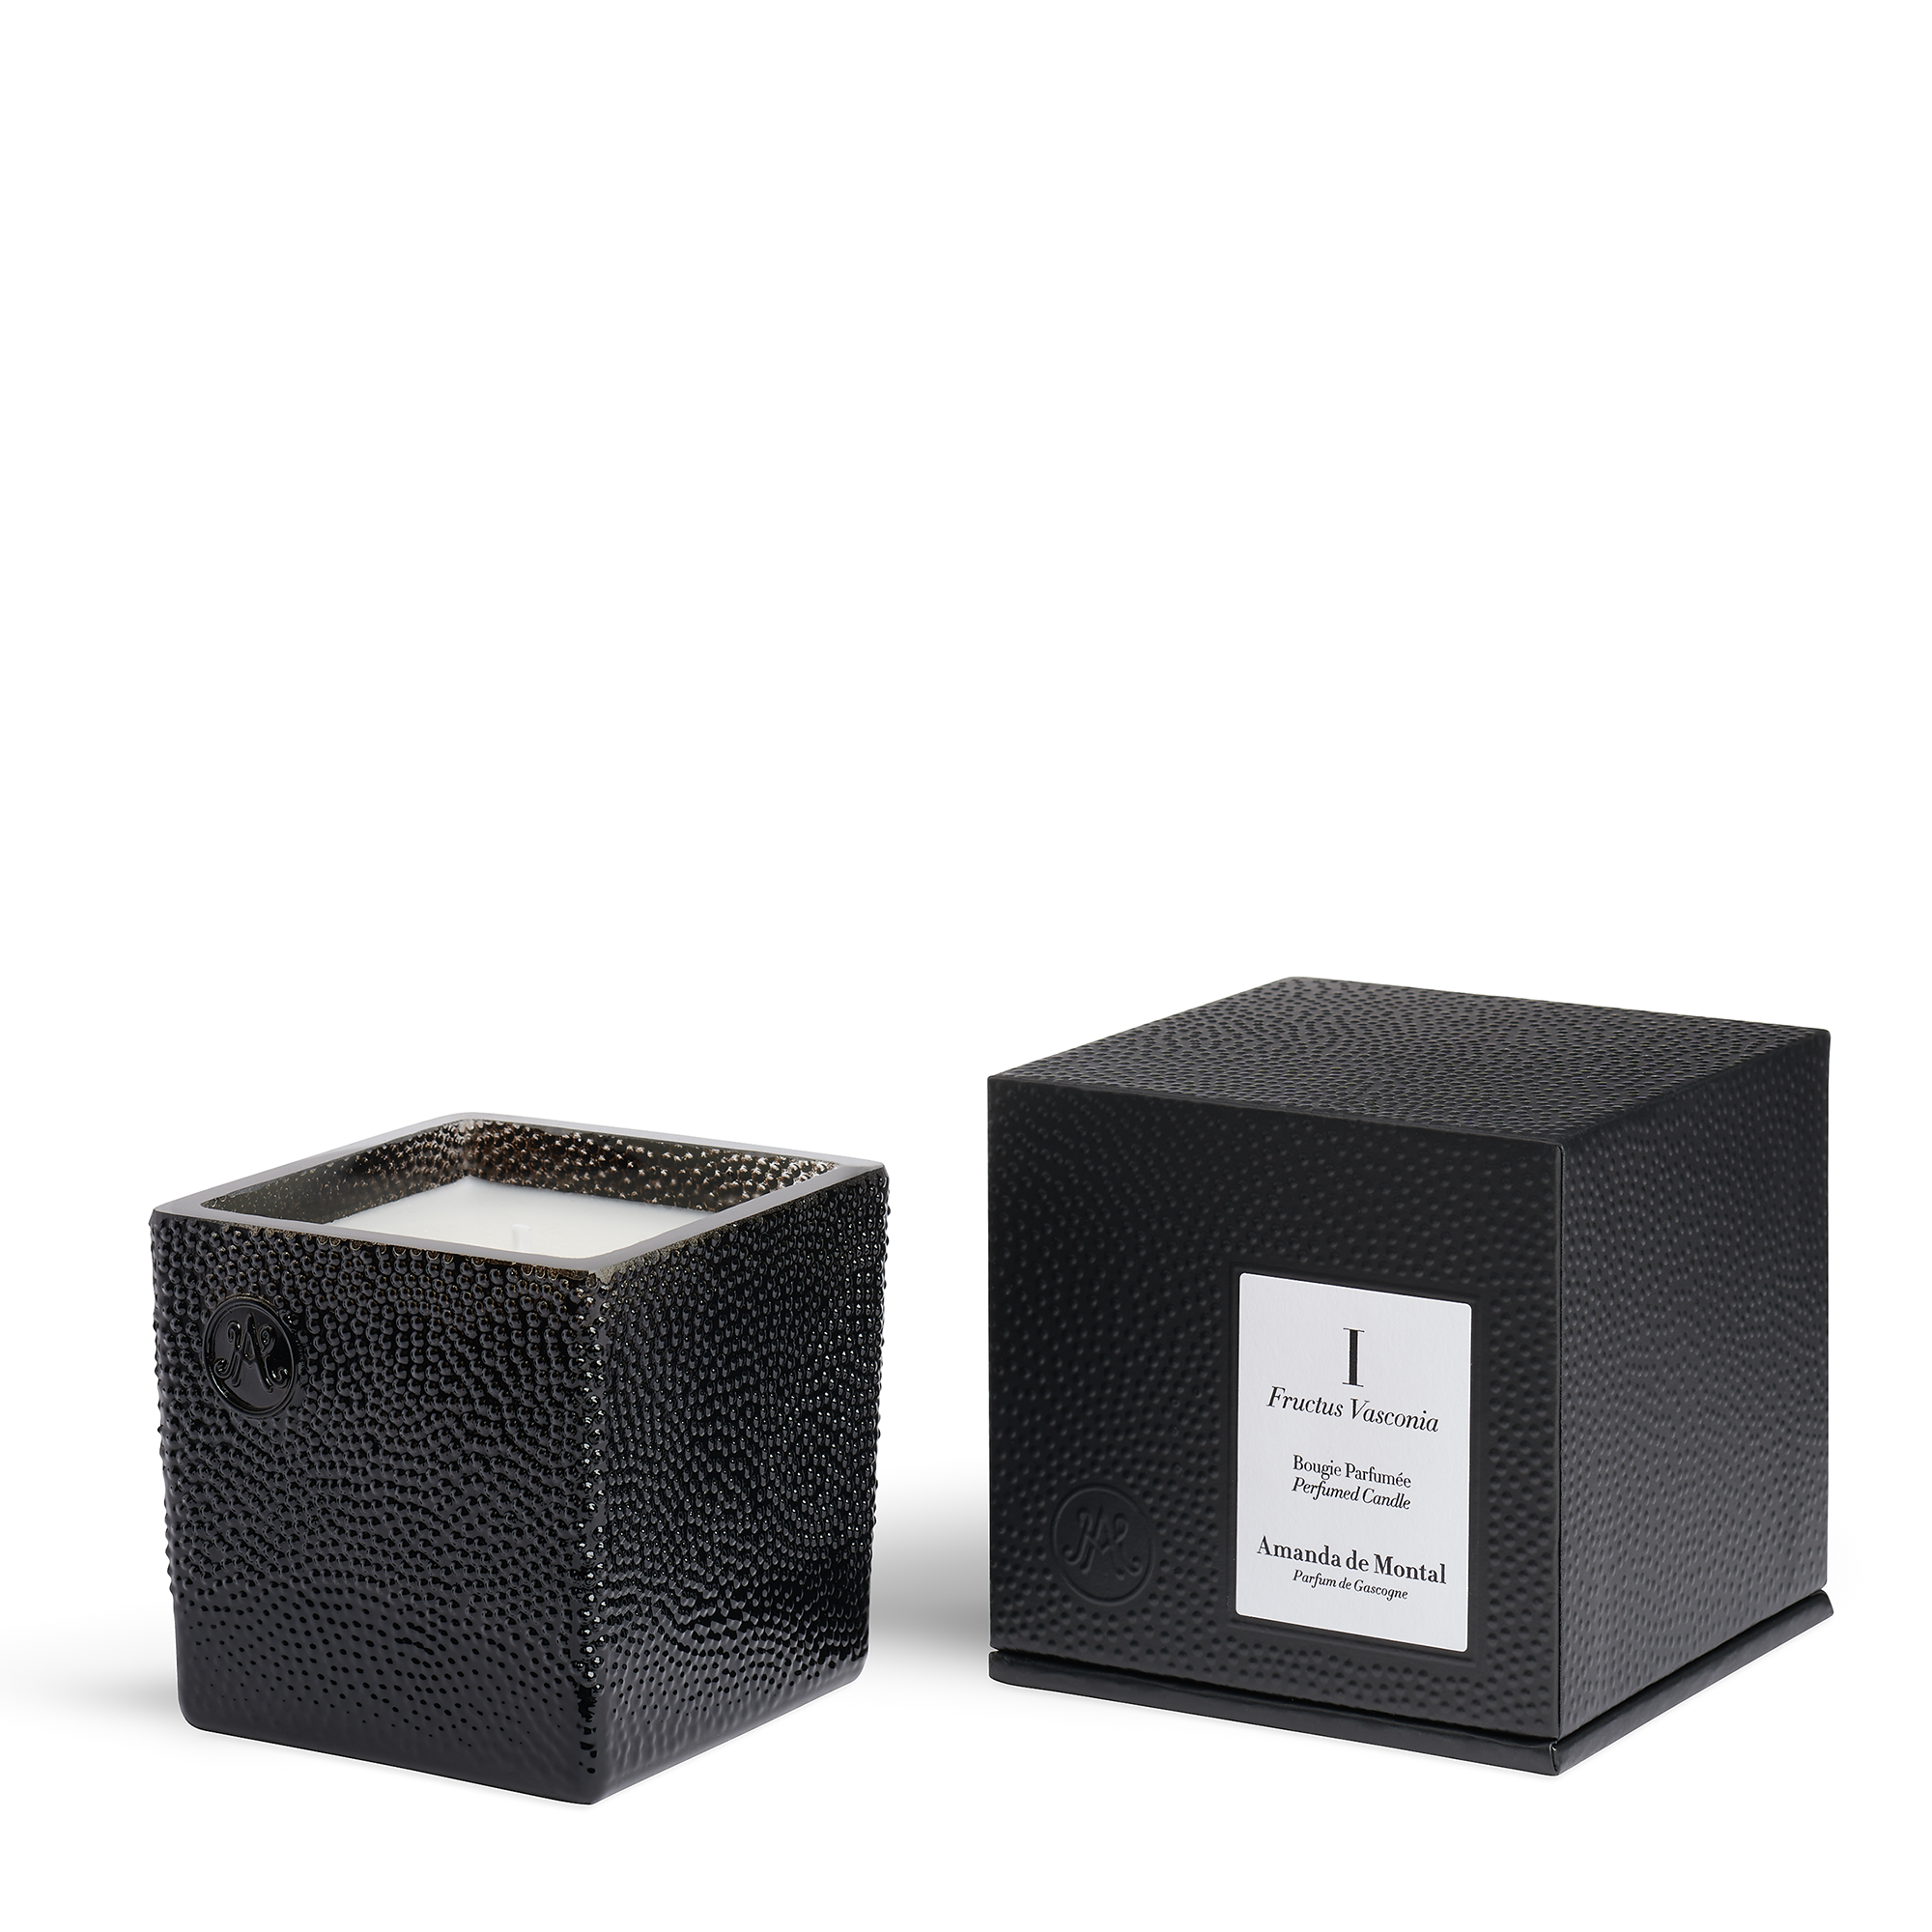 The artisanal black glass candle vessel contains thousands of bubbles, revealing a twinkling flame. Sweet fig mingles with the scent of warm grass and nourishing plums.